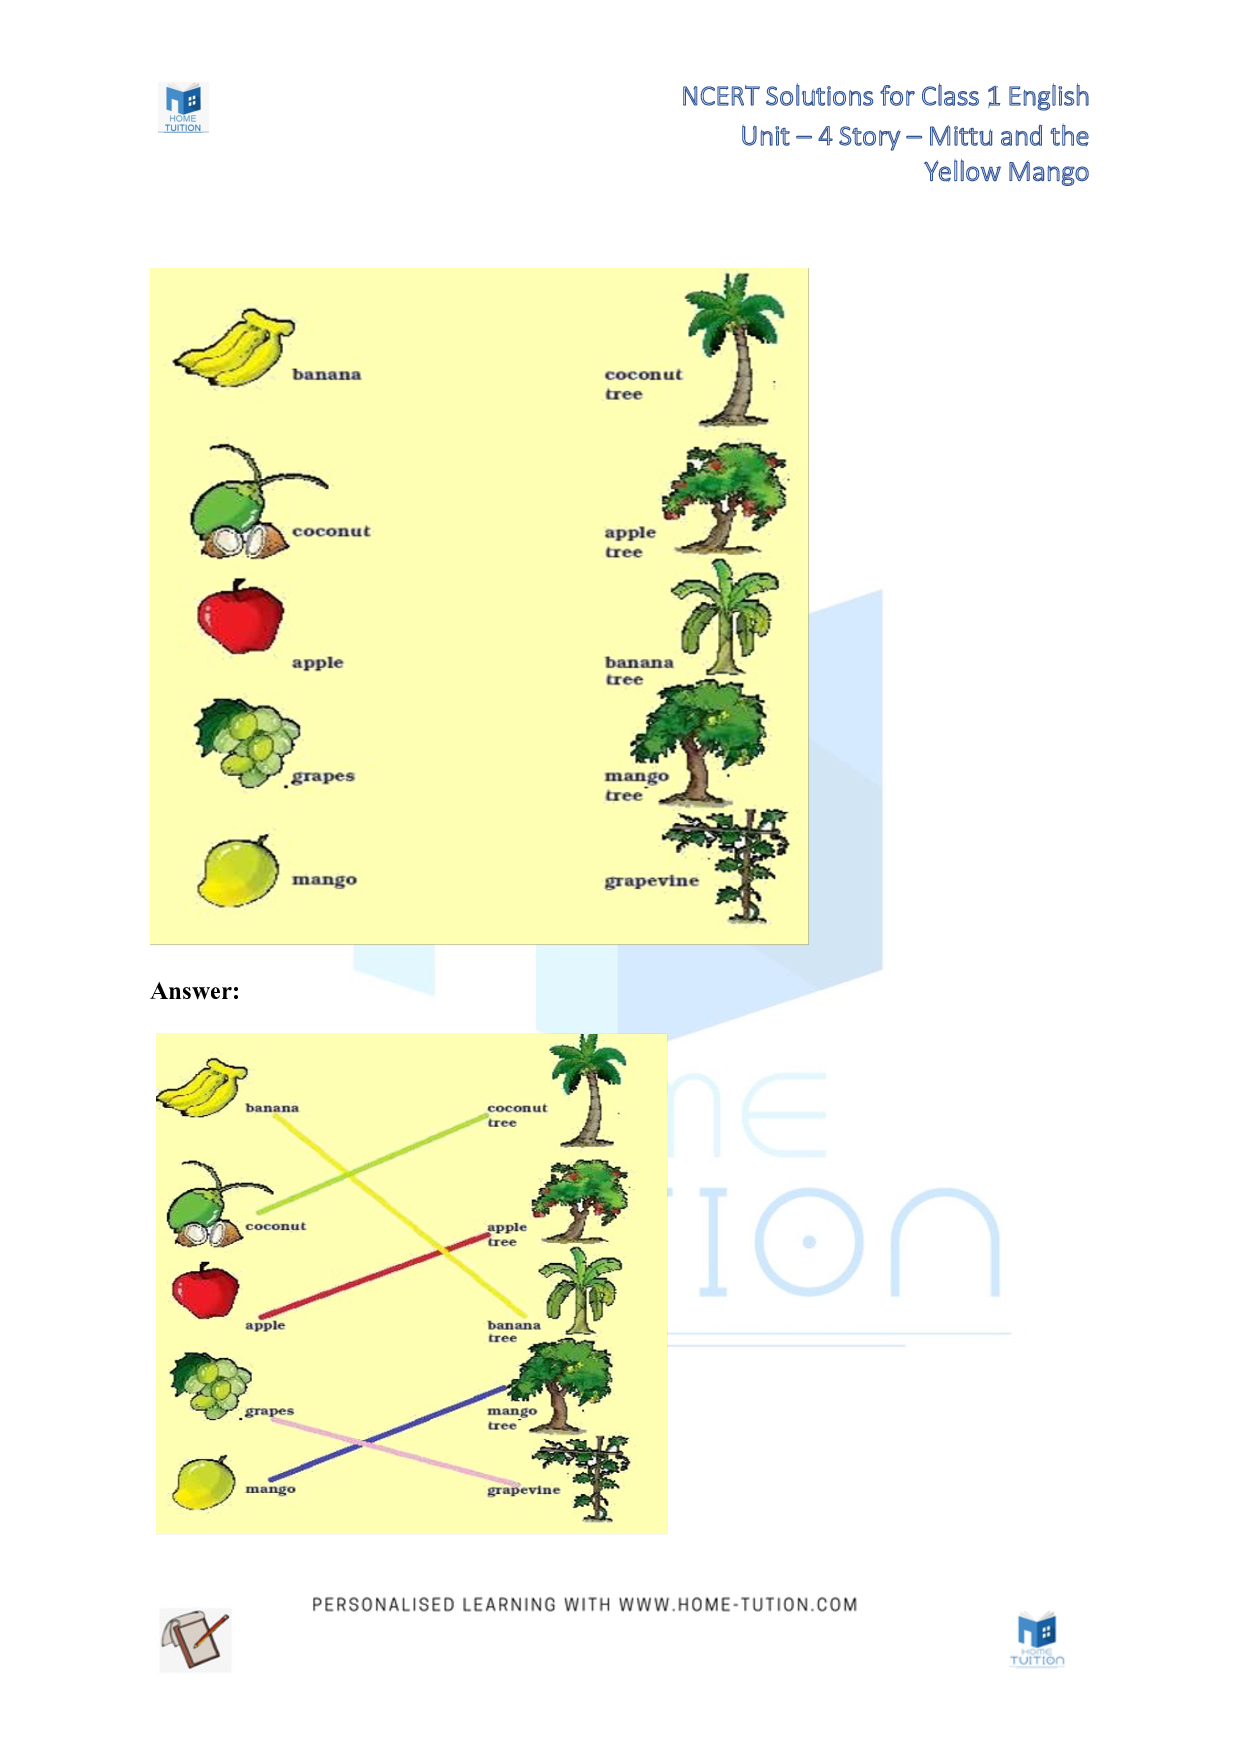 NCERT Solutions for Class 1 English Unit 4 Story - Mittu and the Yellow Mango